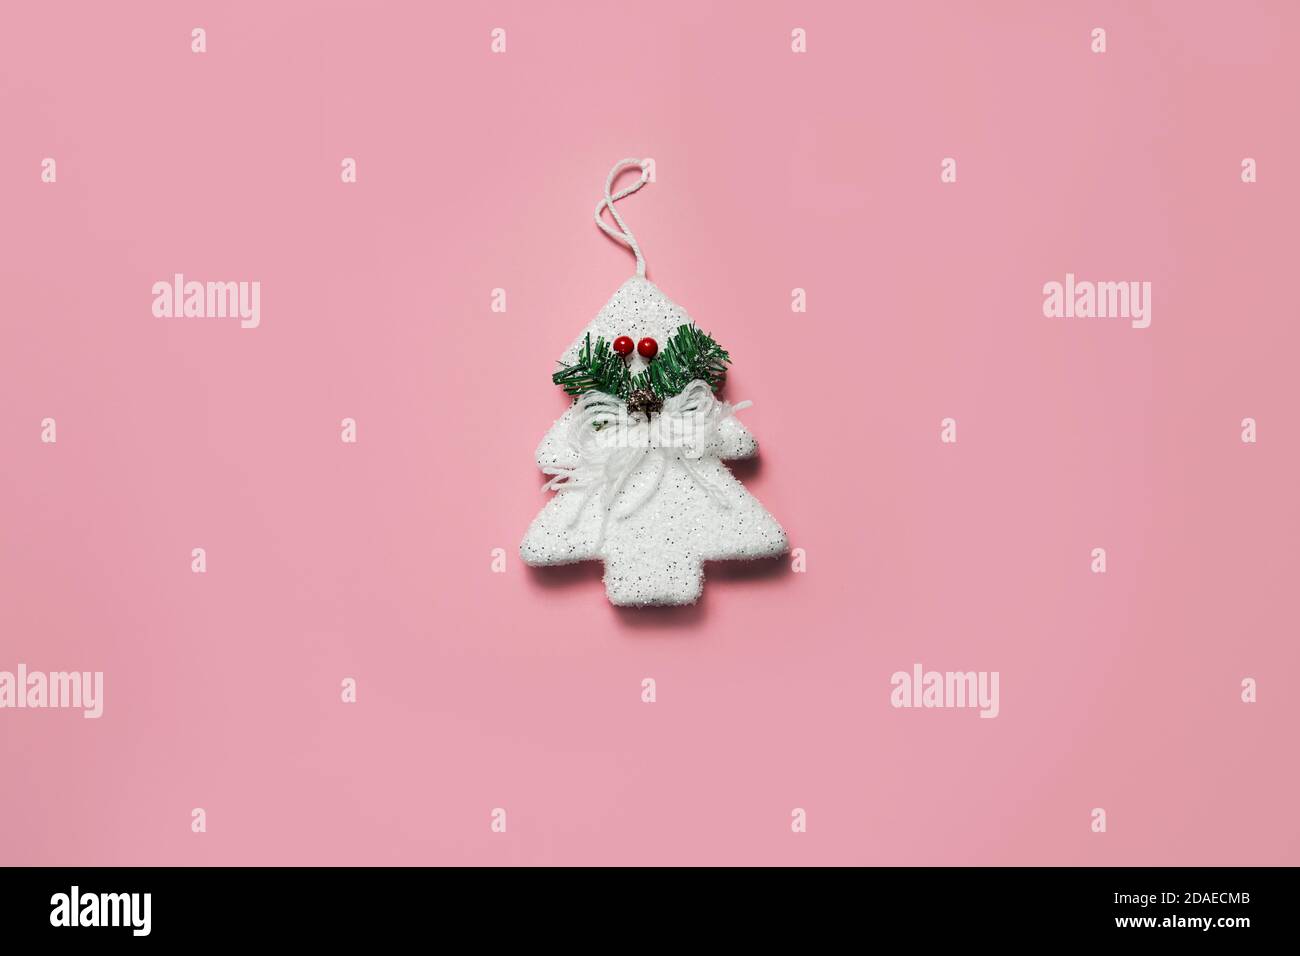 christmas decoration on a pink background Stock Photo